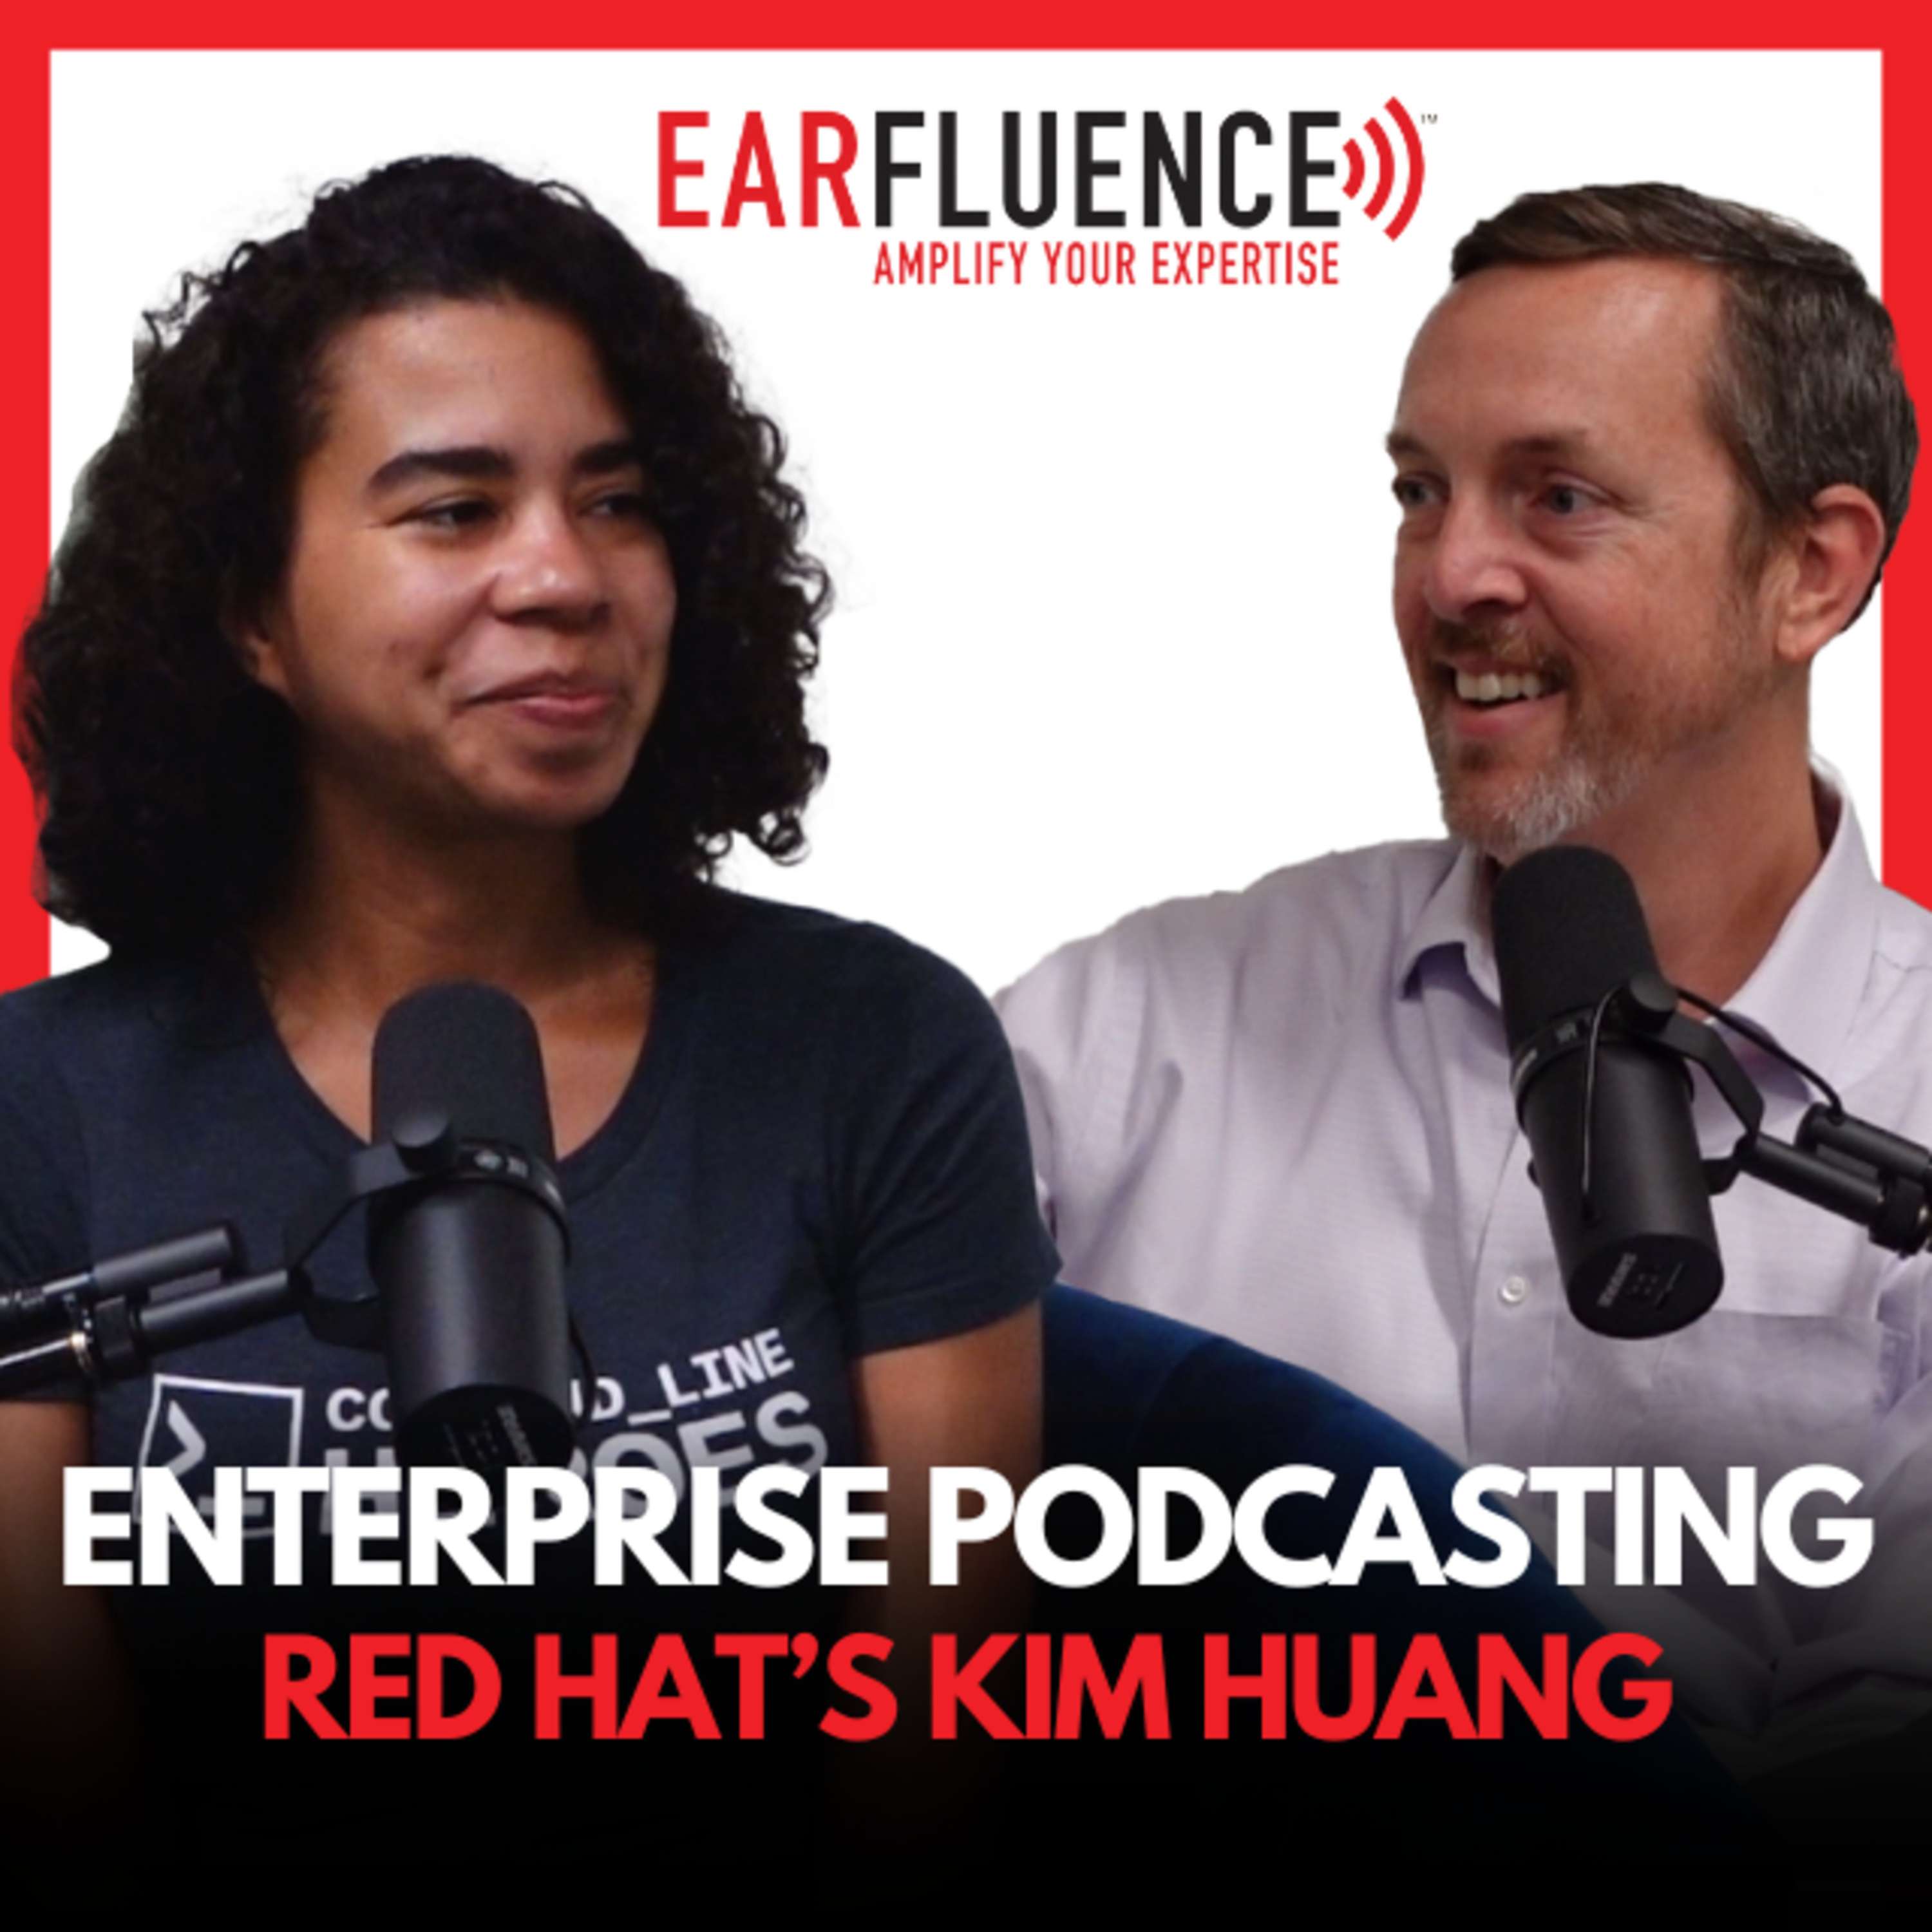 Enterprise Podcasting, with Red Hat's Kim Huang